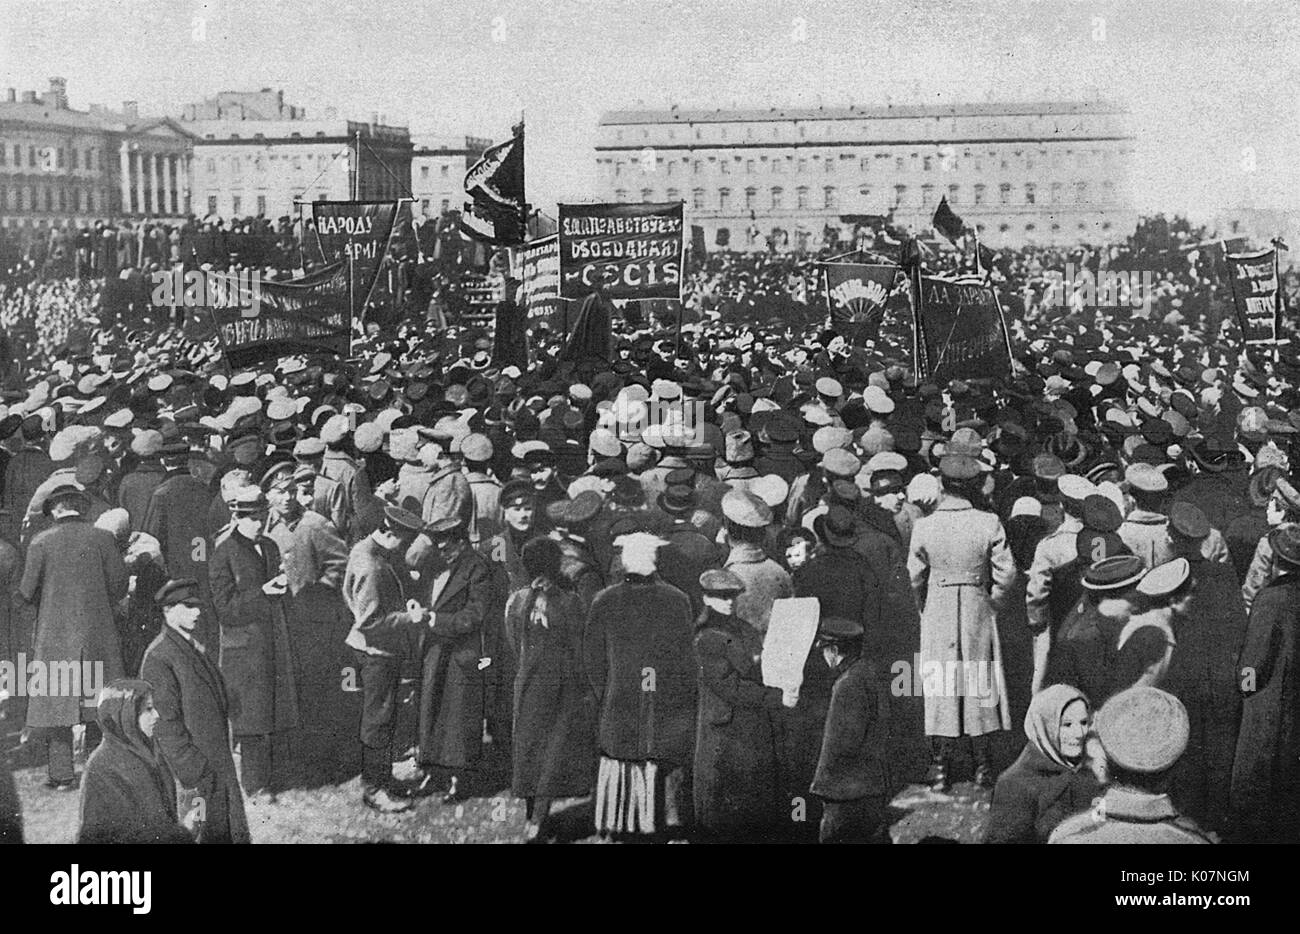 Public gathering in street during Revolution, Russia Stock Photo